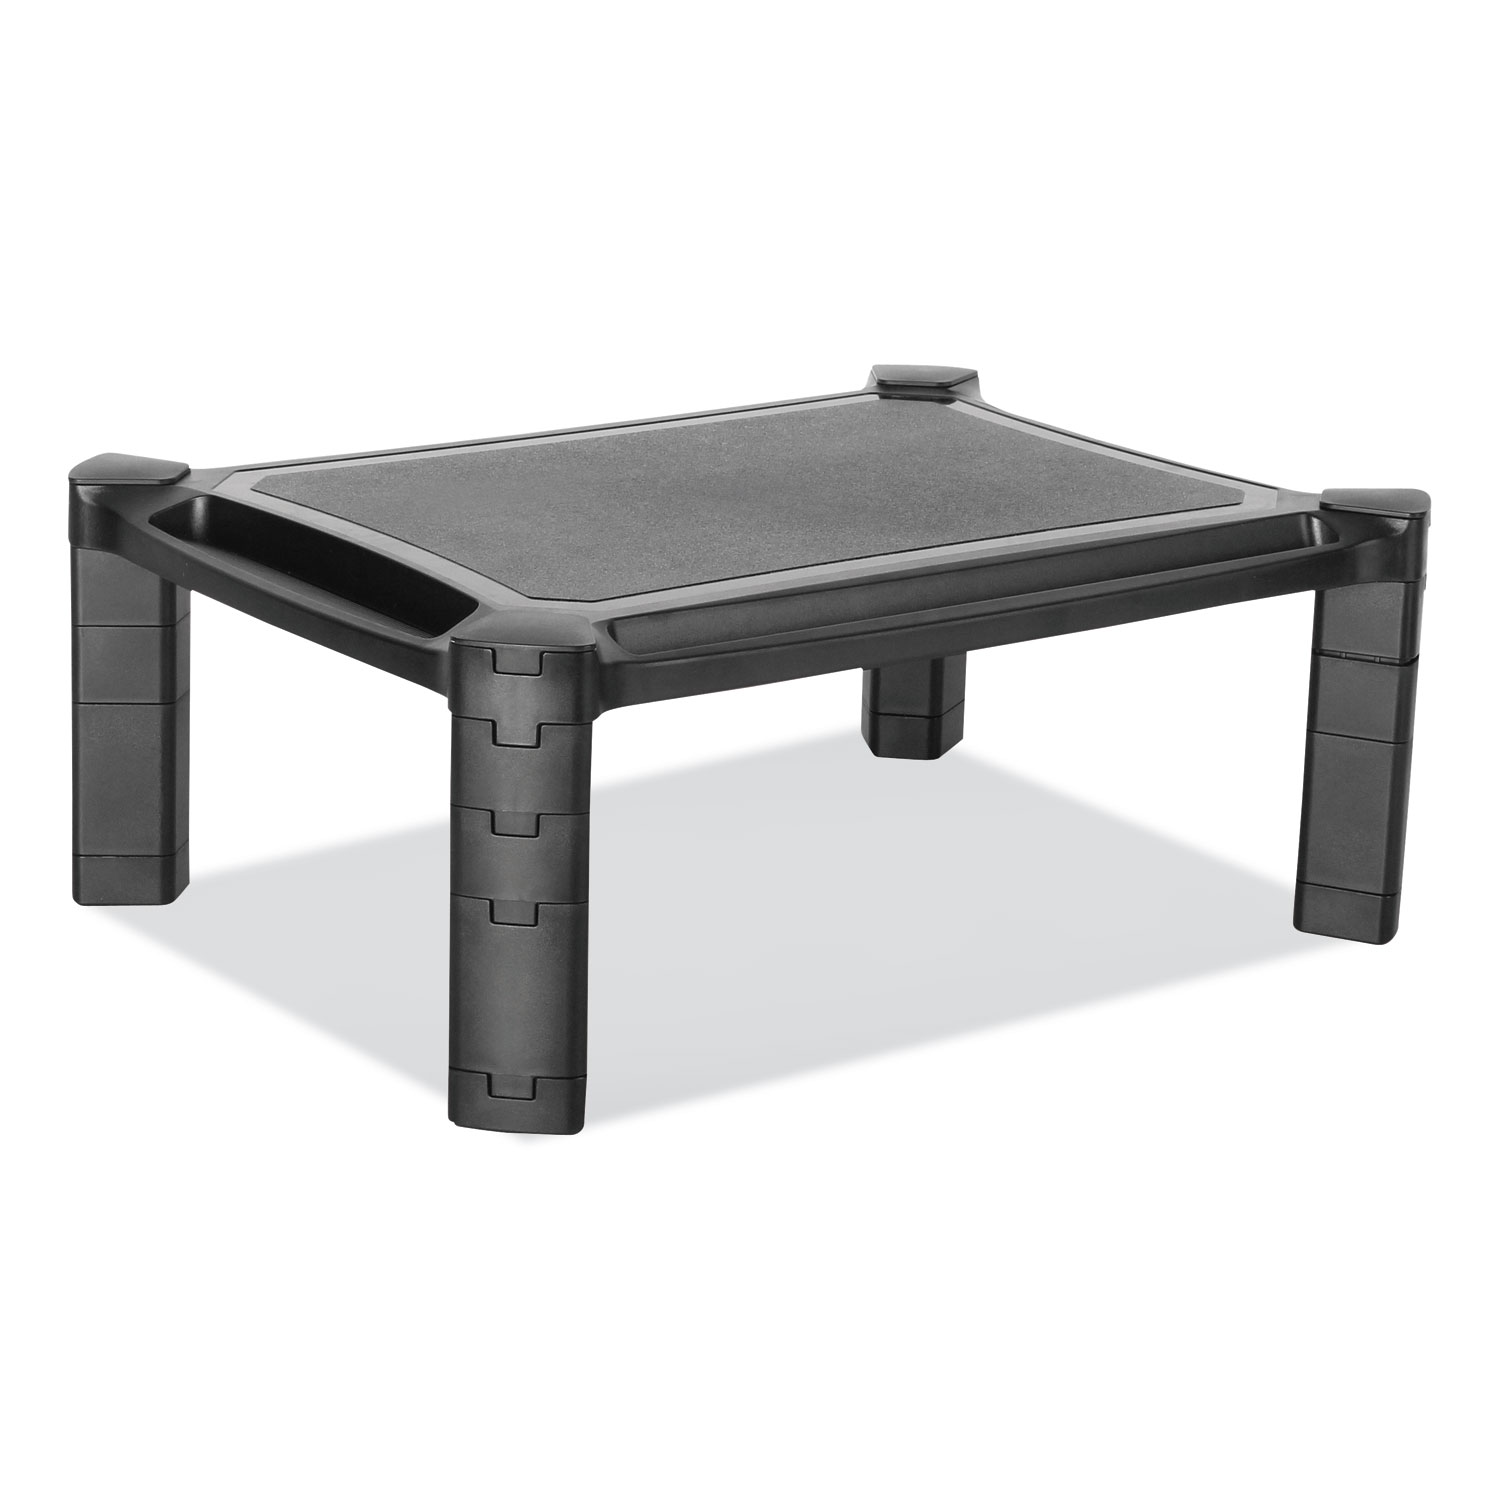  Innovera IVR55051 Large Monitor Stand with Cable Management, 12.99 x 17.1, Black (IVR55051) 